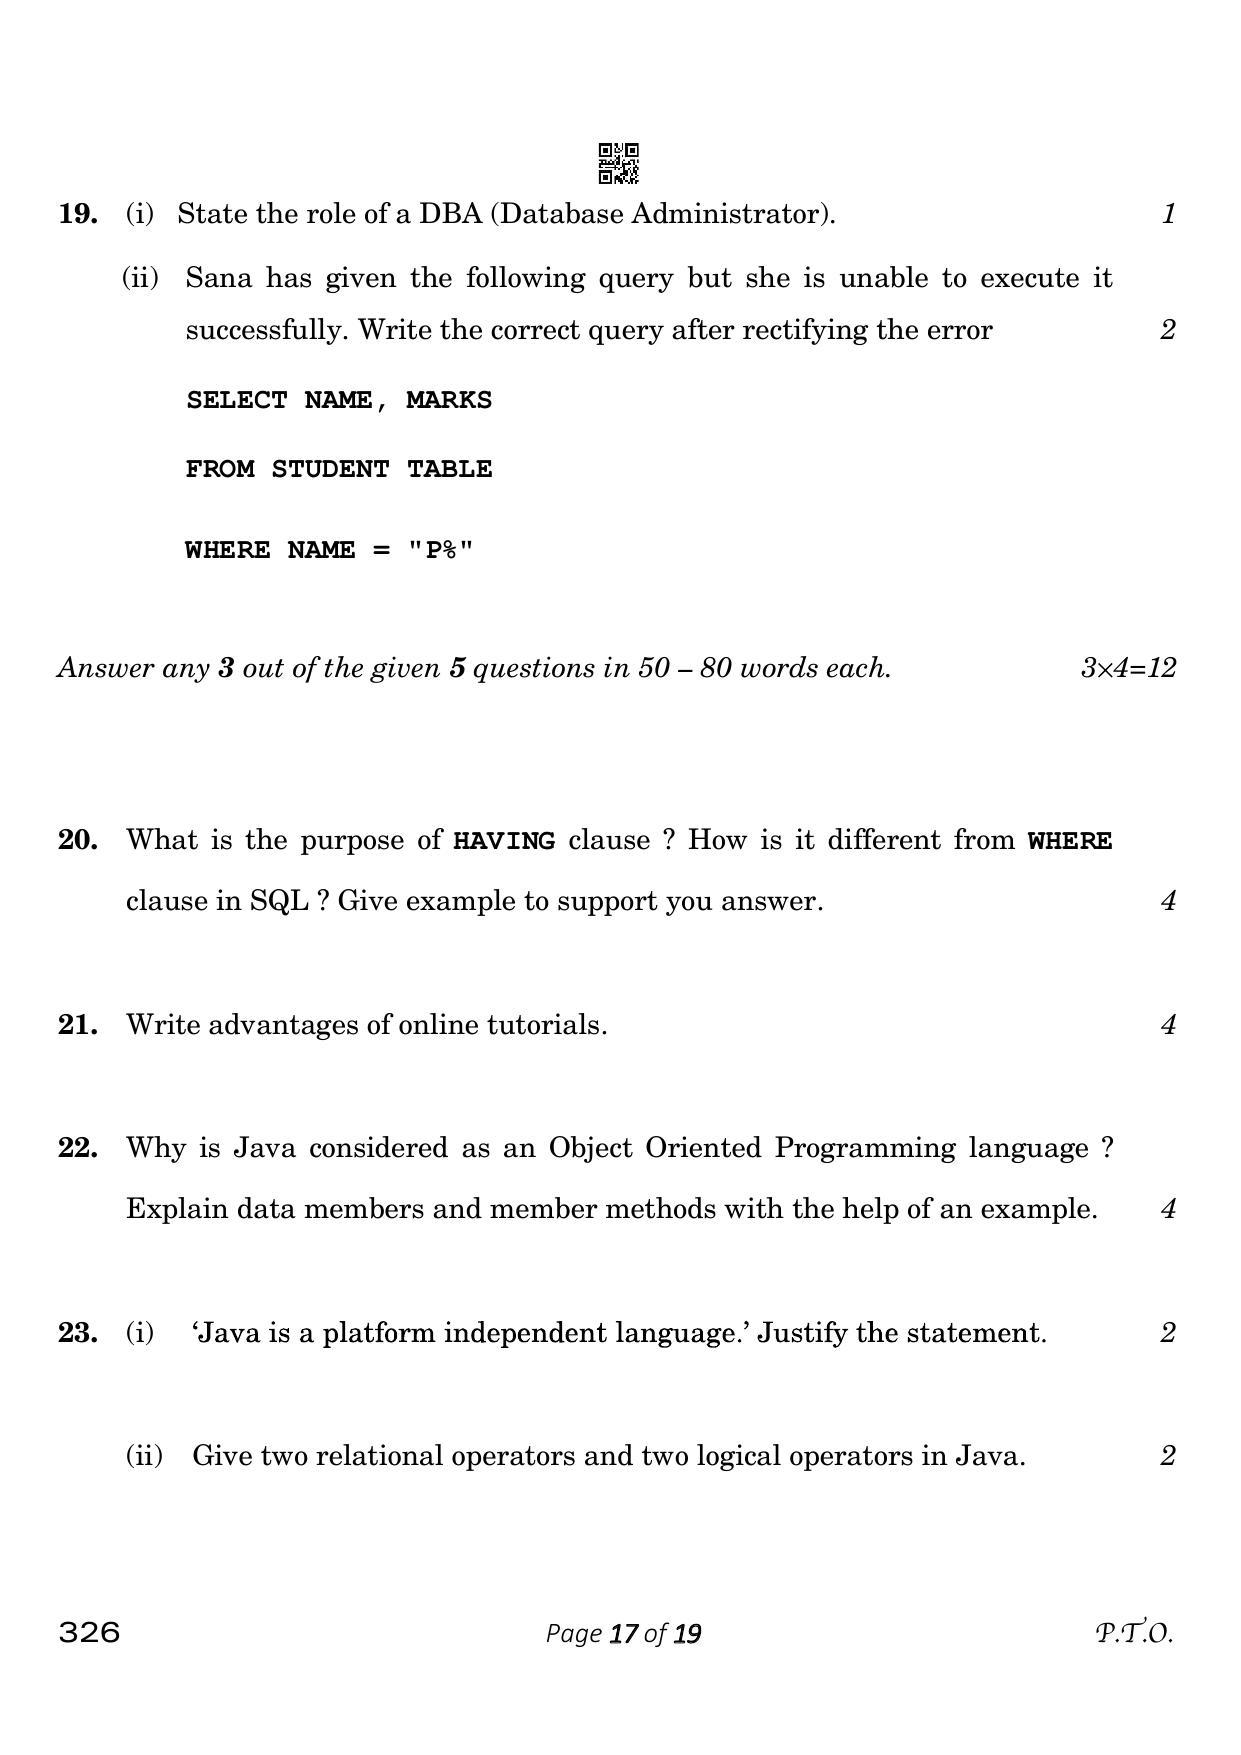 CBSE Class 12 326_Information Technology 2023 Question Paper - Page 17